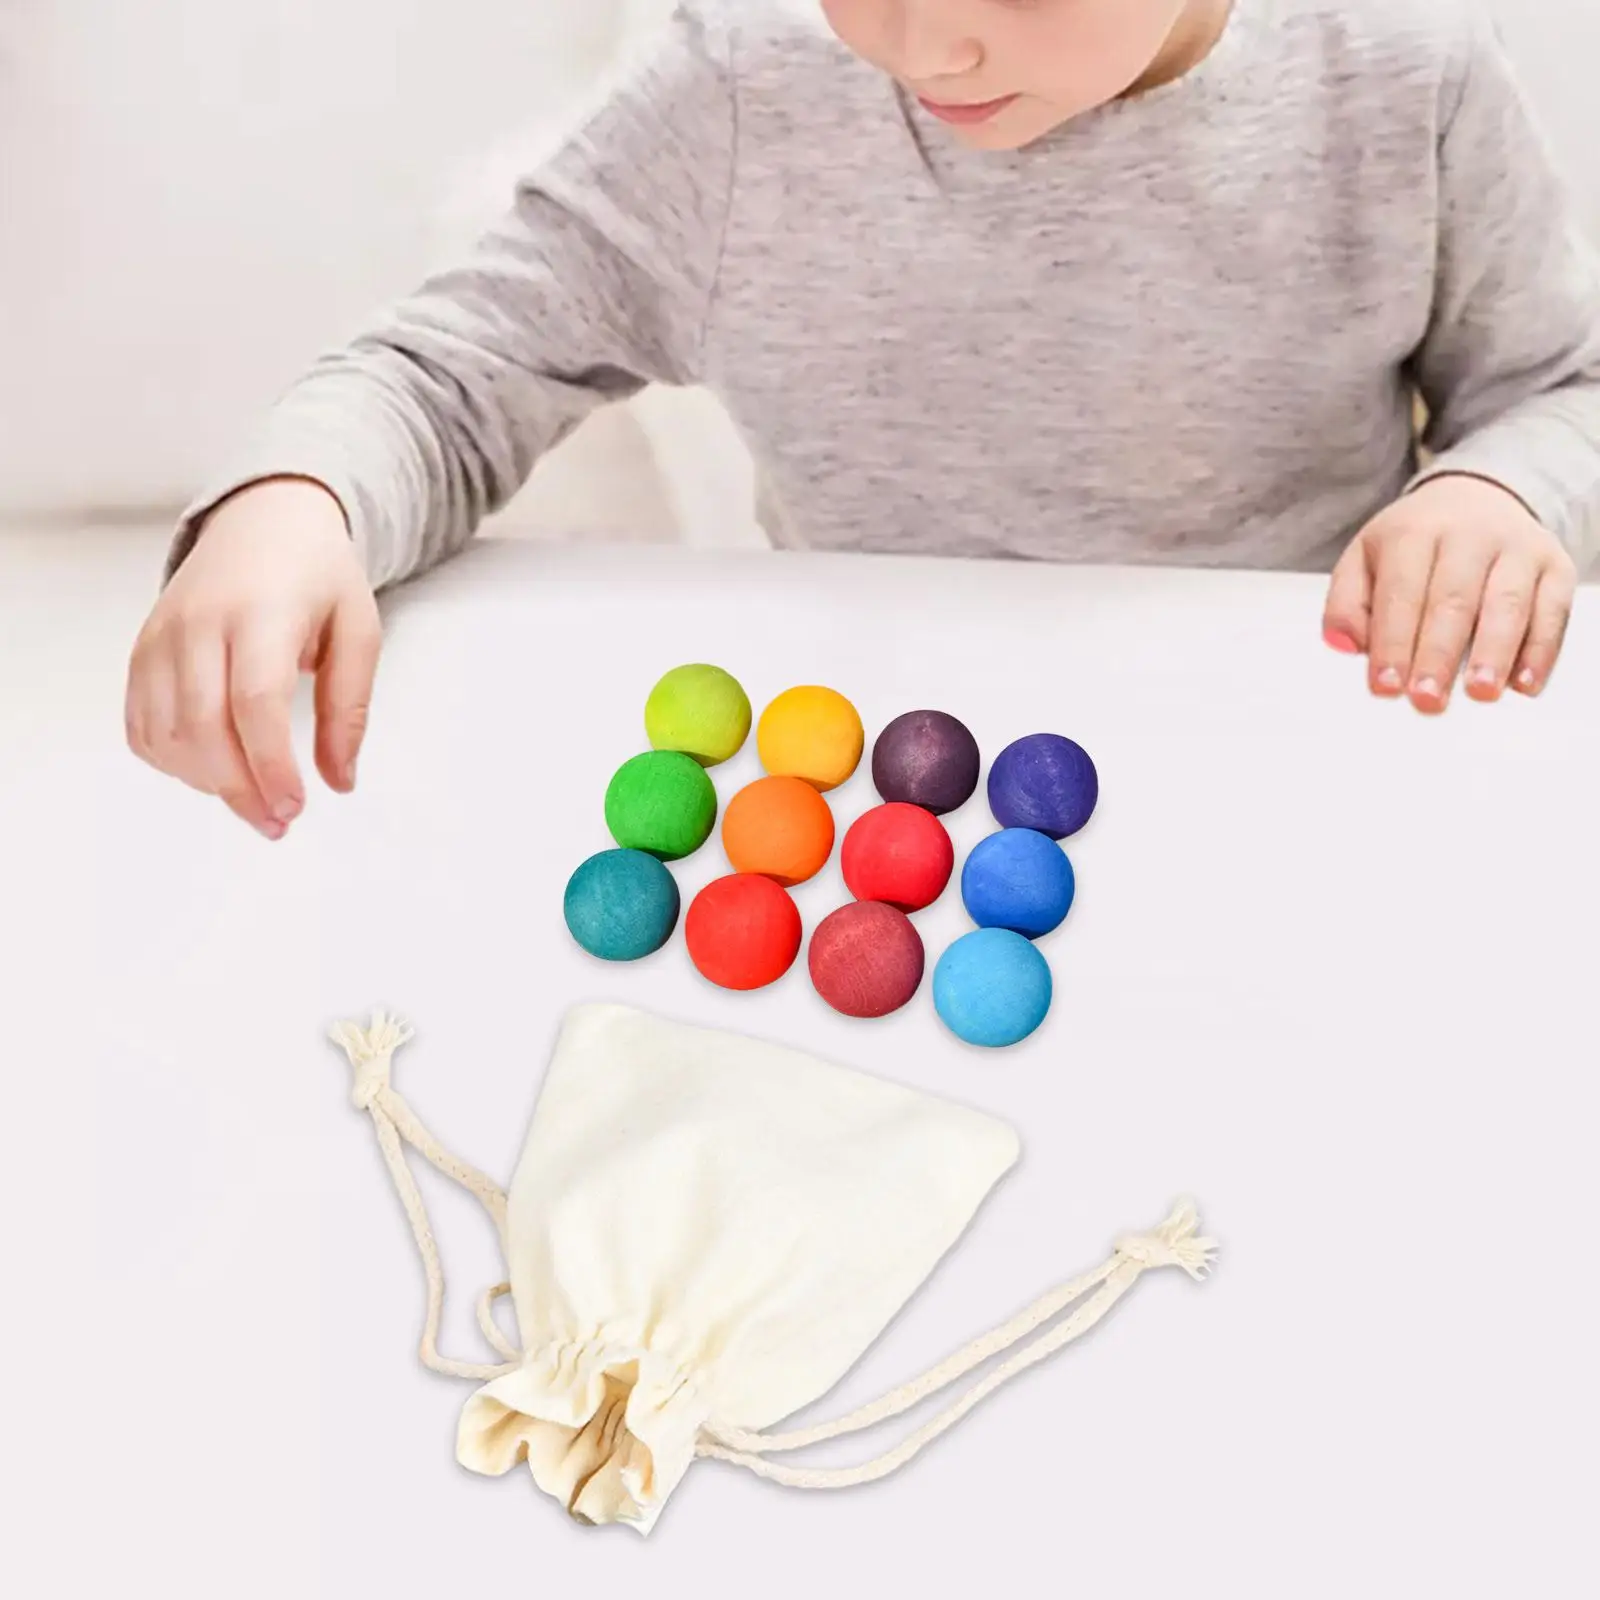 12 Pieces Montessori Wooden Ball Toys Color Sorting Toys for Boys Children